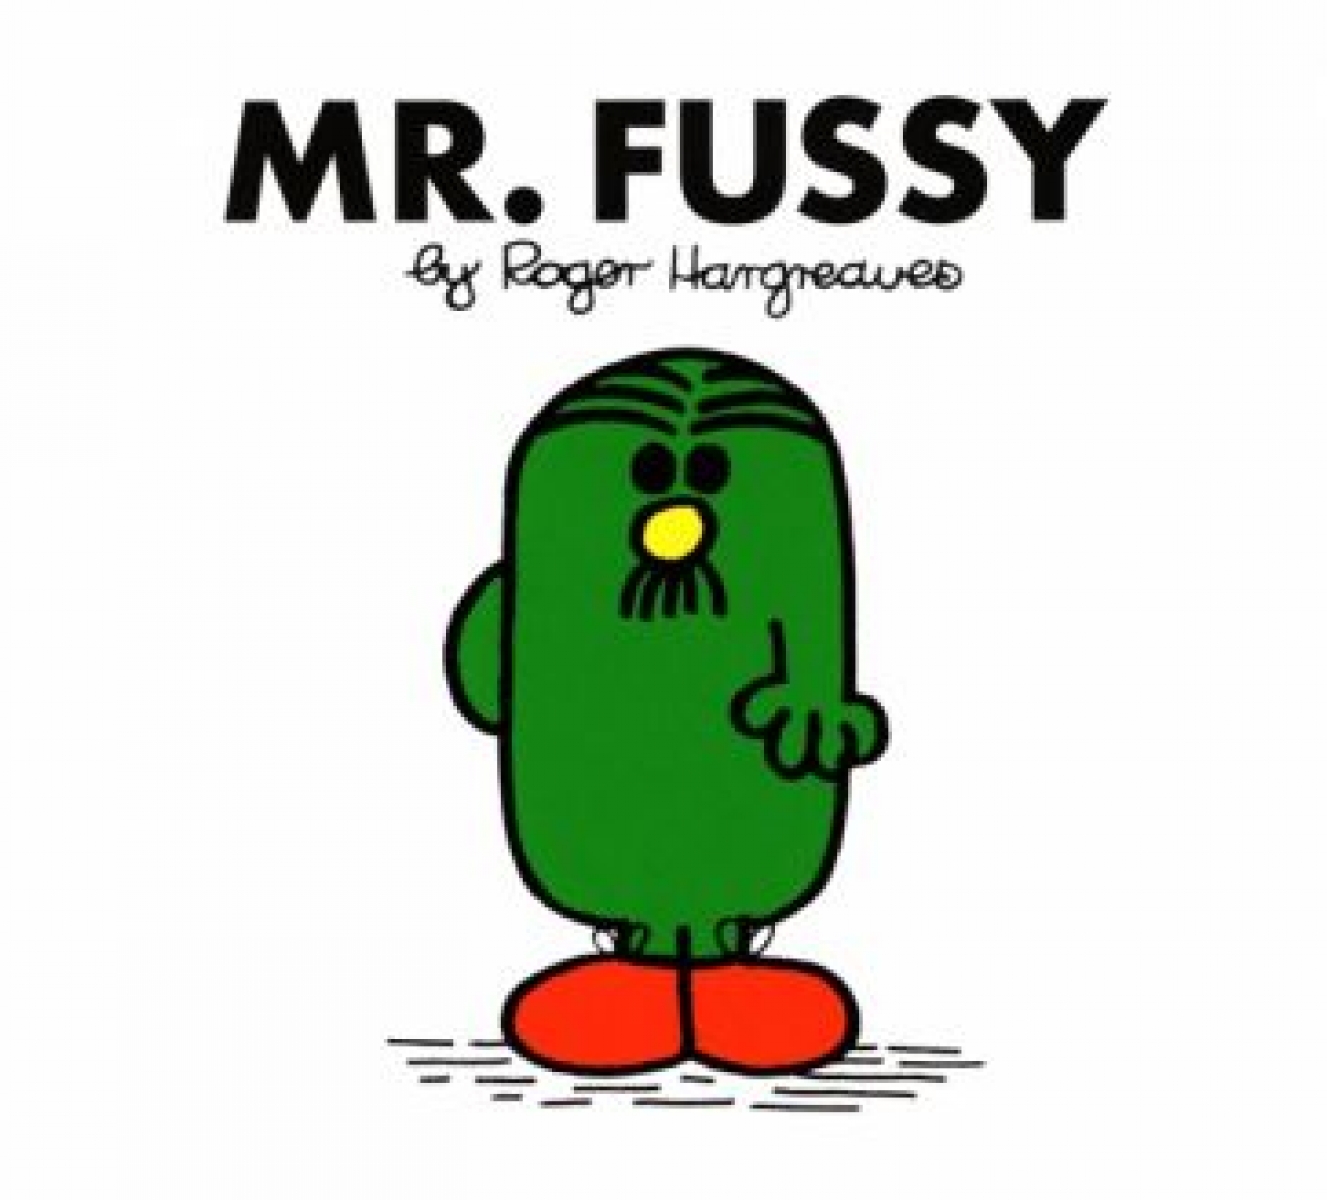 Hargreaves Roger Mr. Fussy 